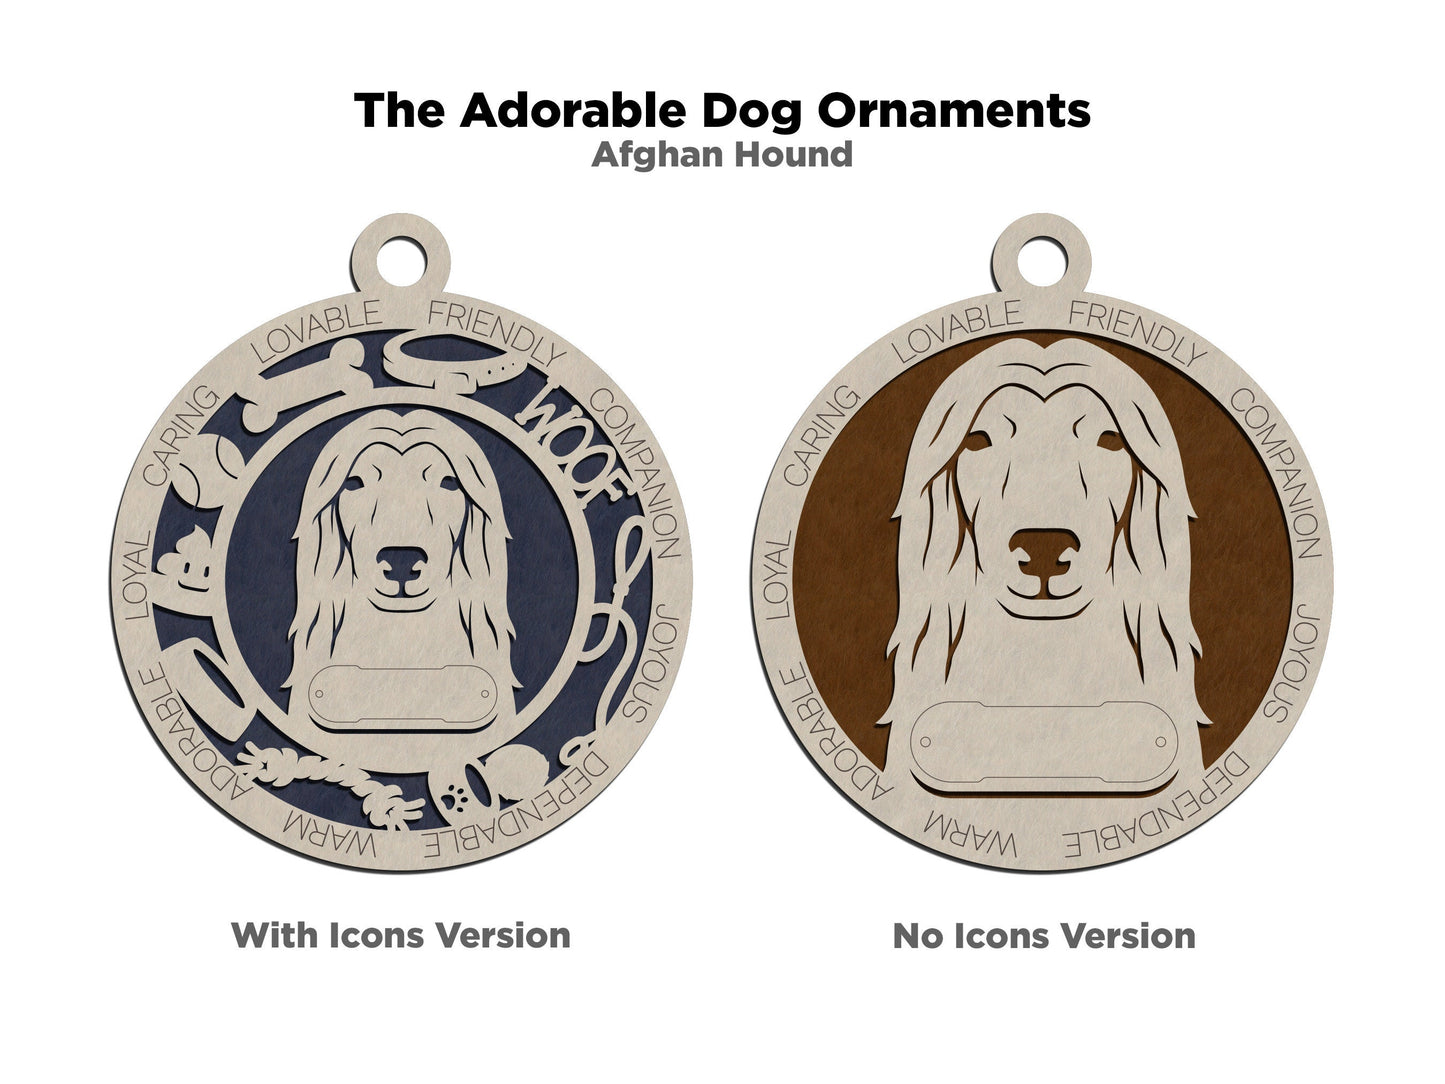 Afghan Hound - Adorable Dog Ornaments - 2 Ornaments included - SVG, PDF, AI File Download - Sized for Glowforge